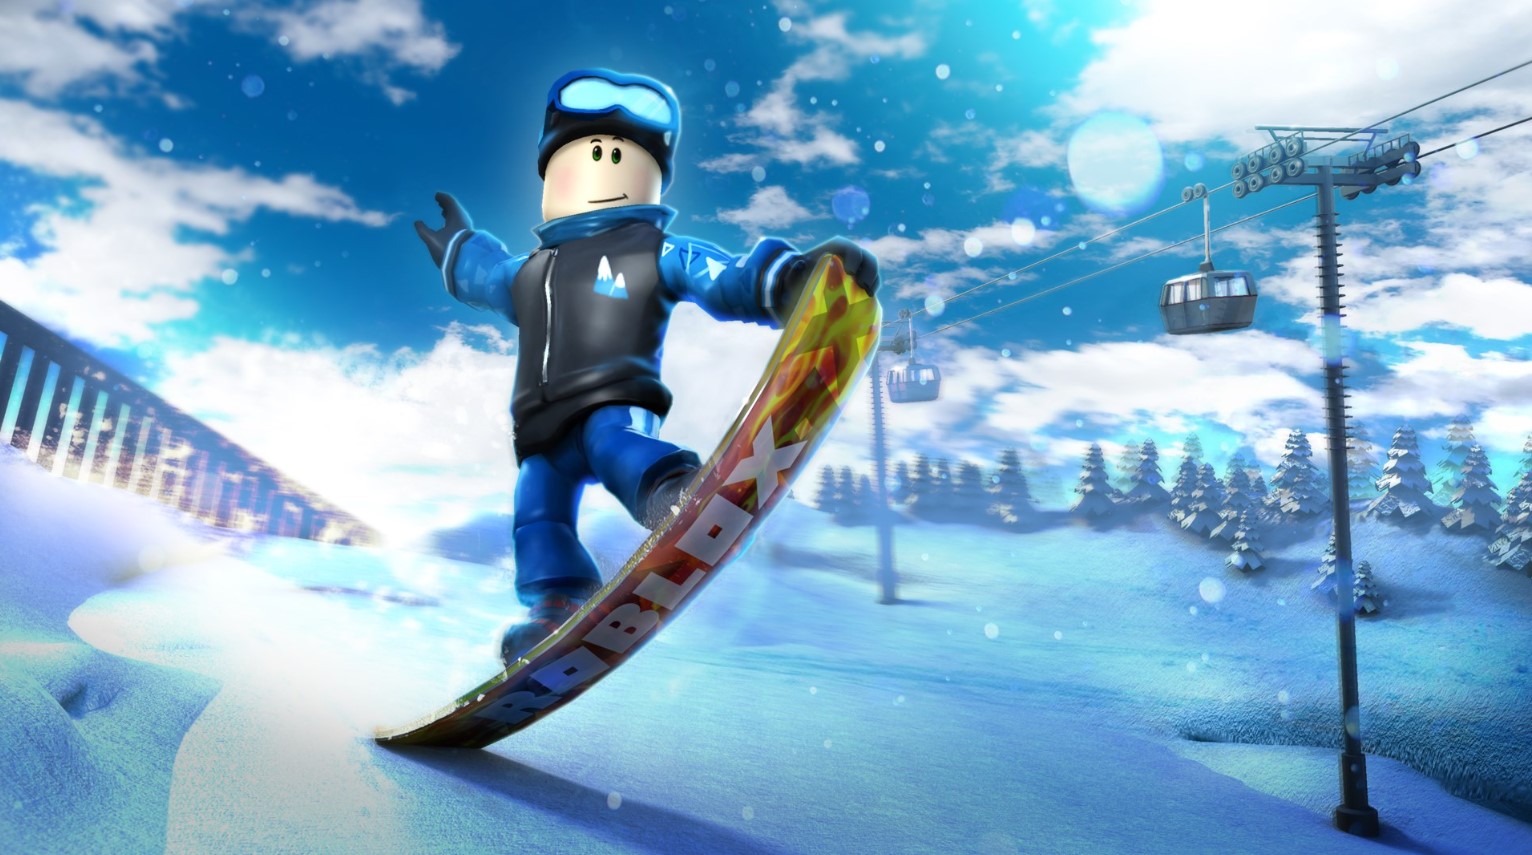 Roblox Headed to PS5, PS4, and Meta Quest